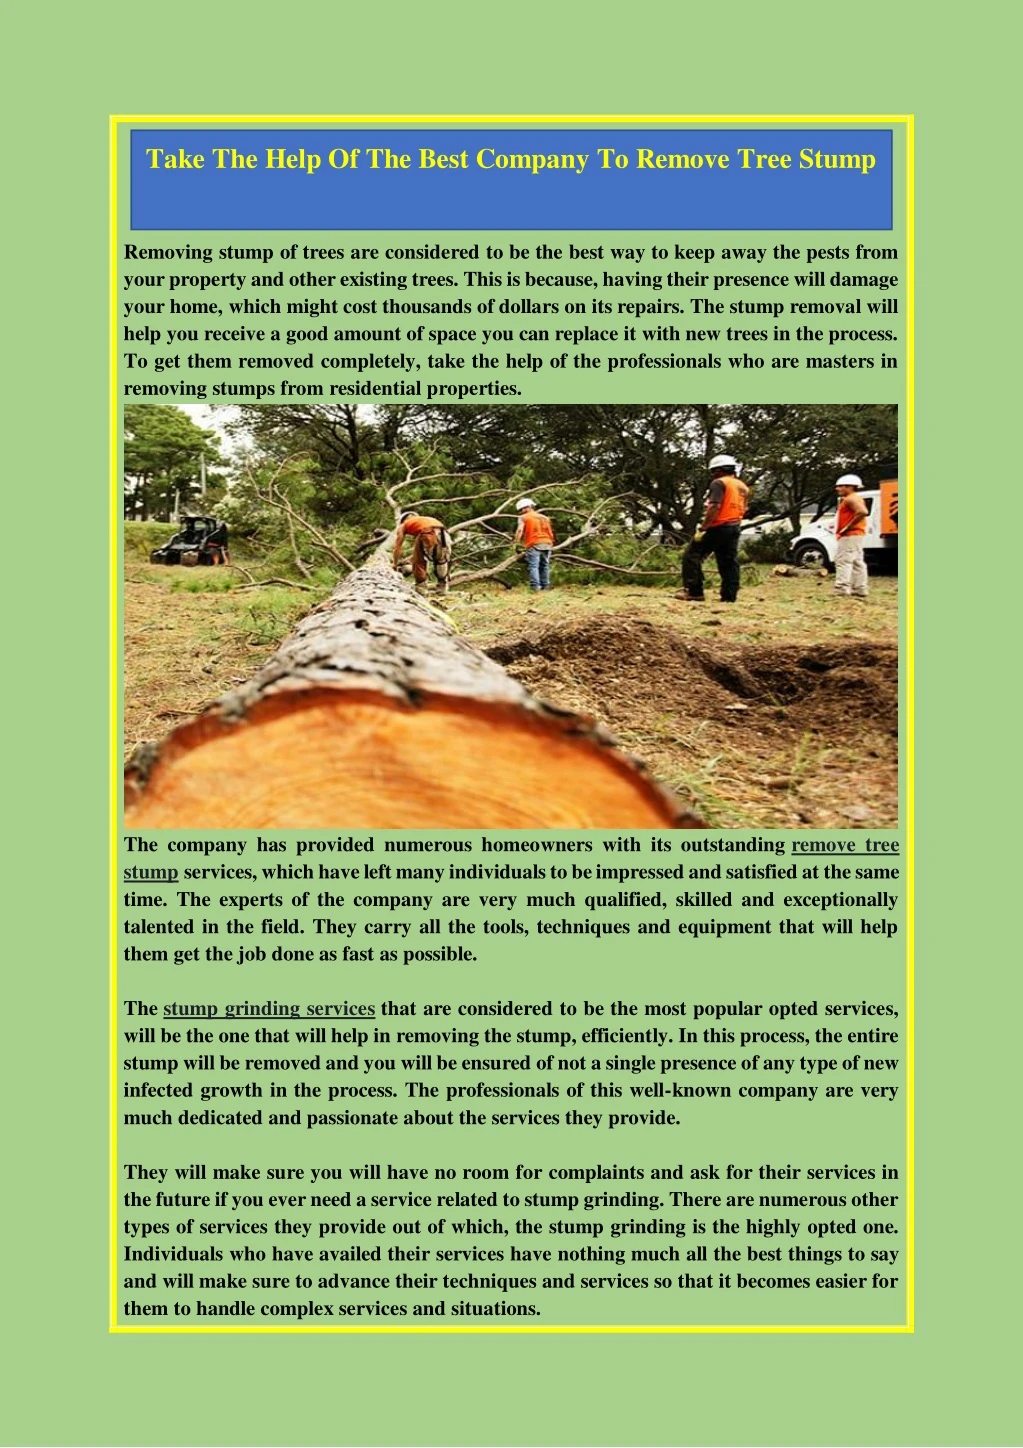 removing stump of trees are considered